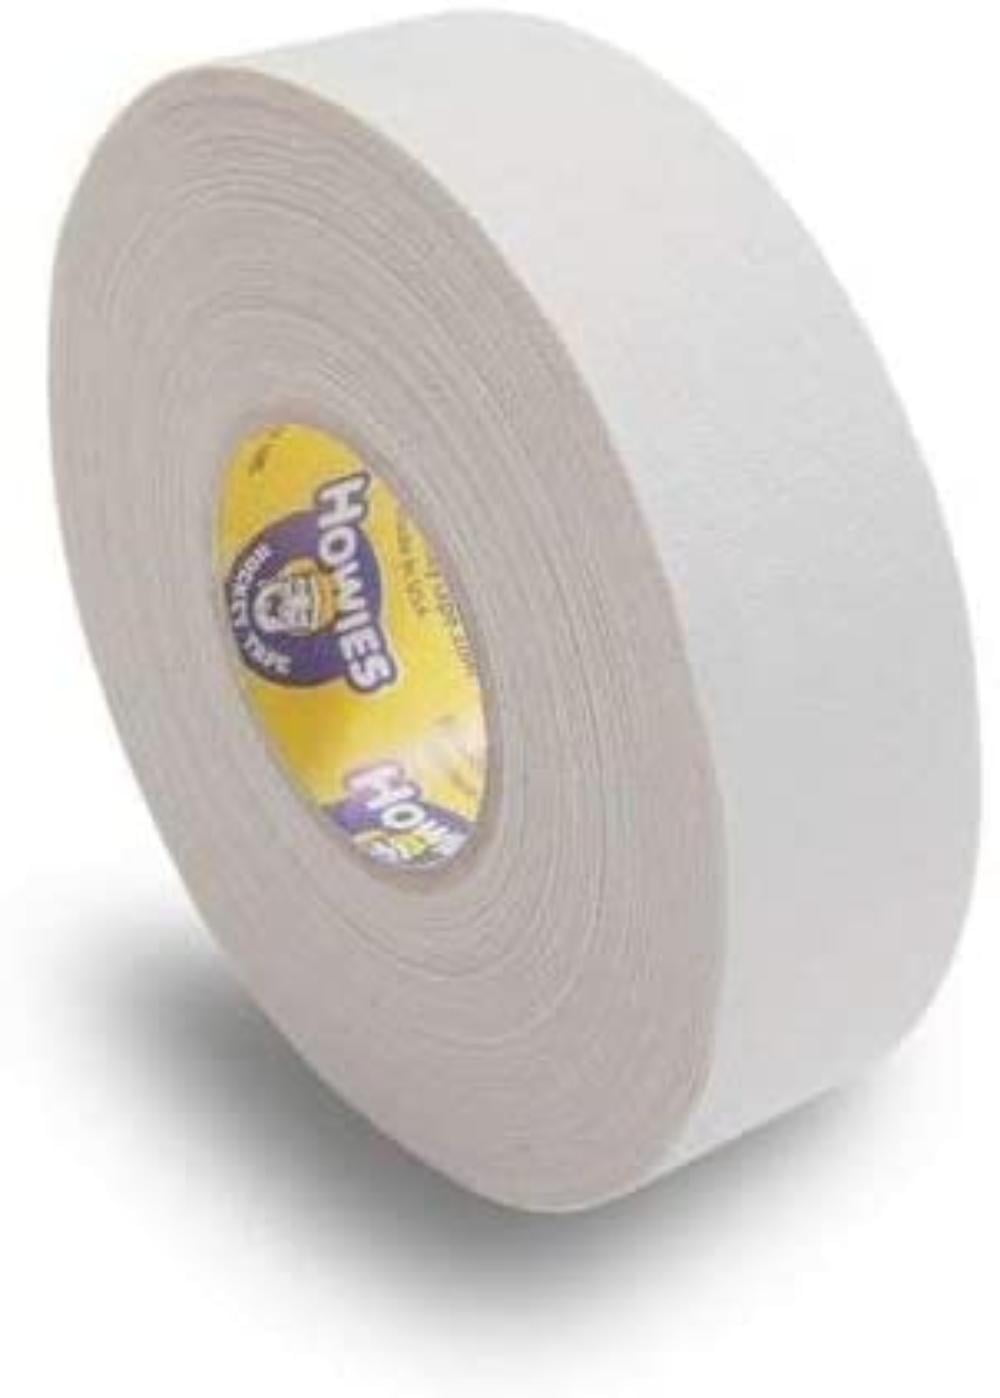 4 Howies Hockey Tape 12 Rolls of White and Clear Bulk Hockey Tape 8 